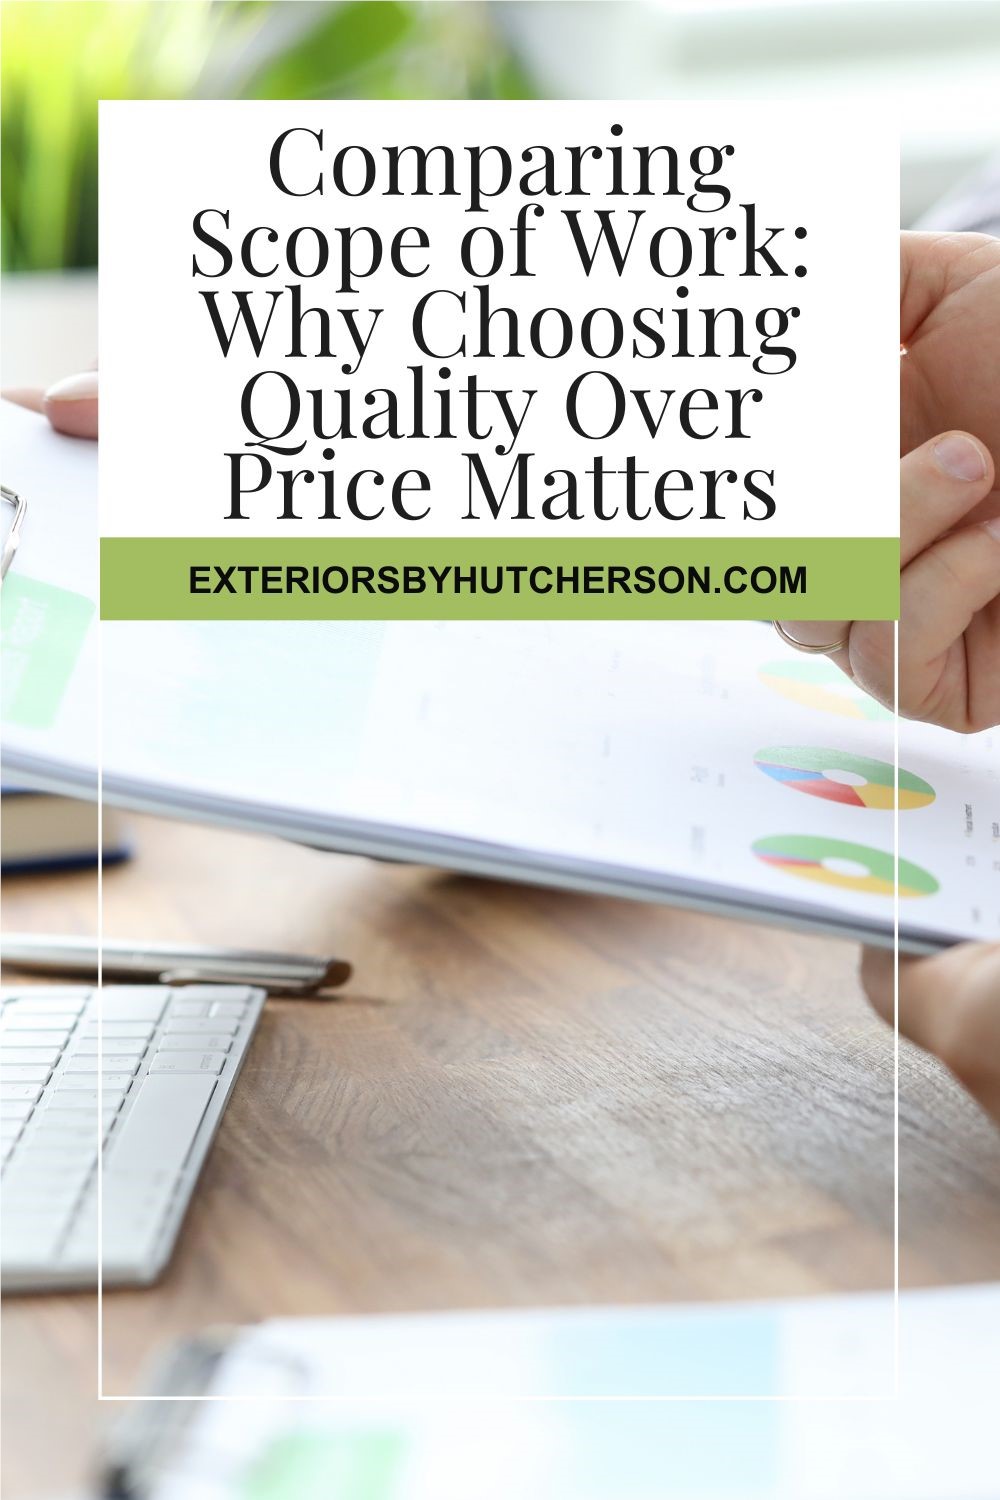 Comparing Scope of Work: Why Choosing Quality Over Price Matters